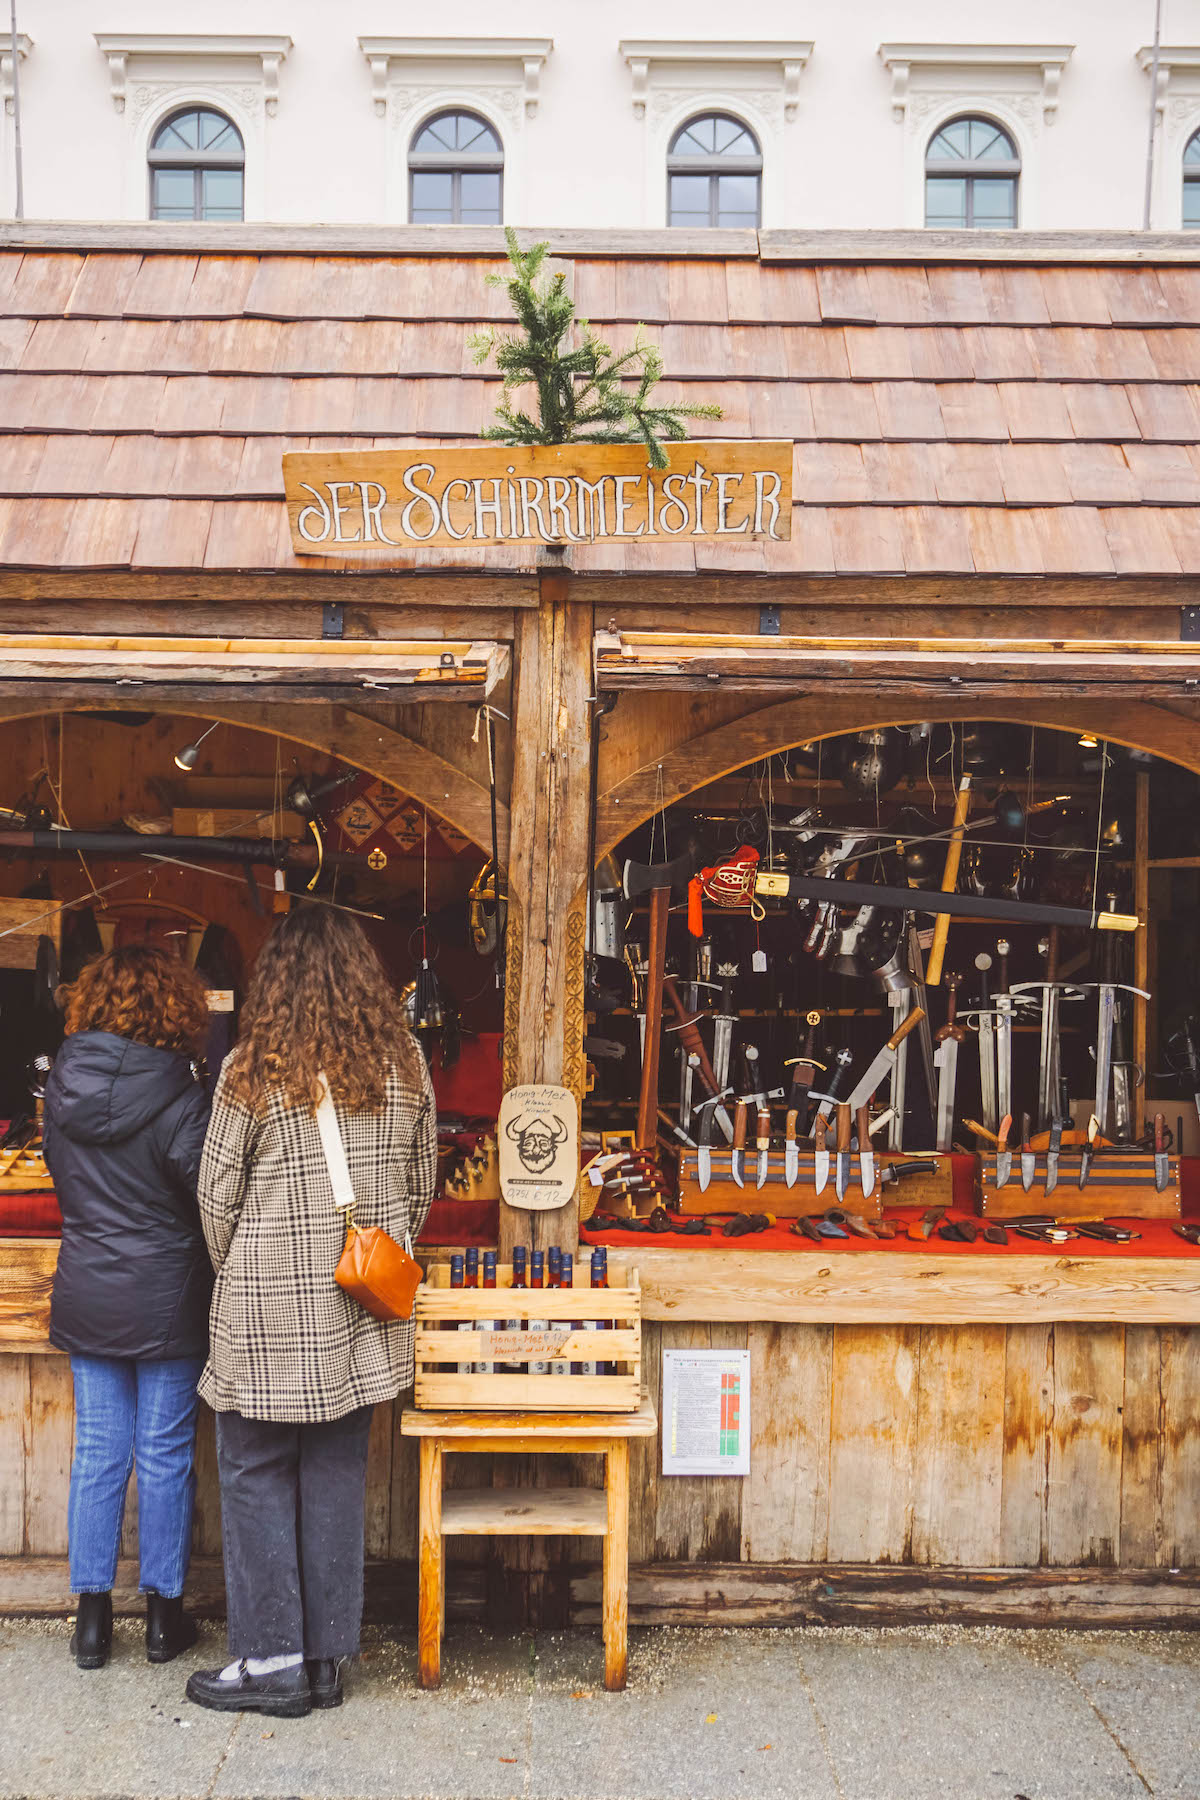 A knife stall at the historic Christmas market in Munich